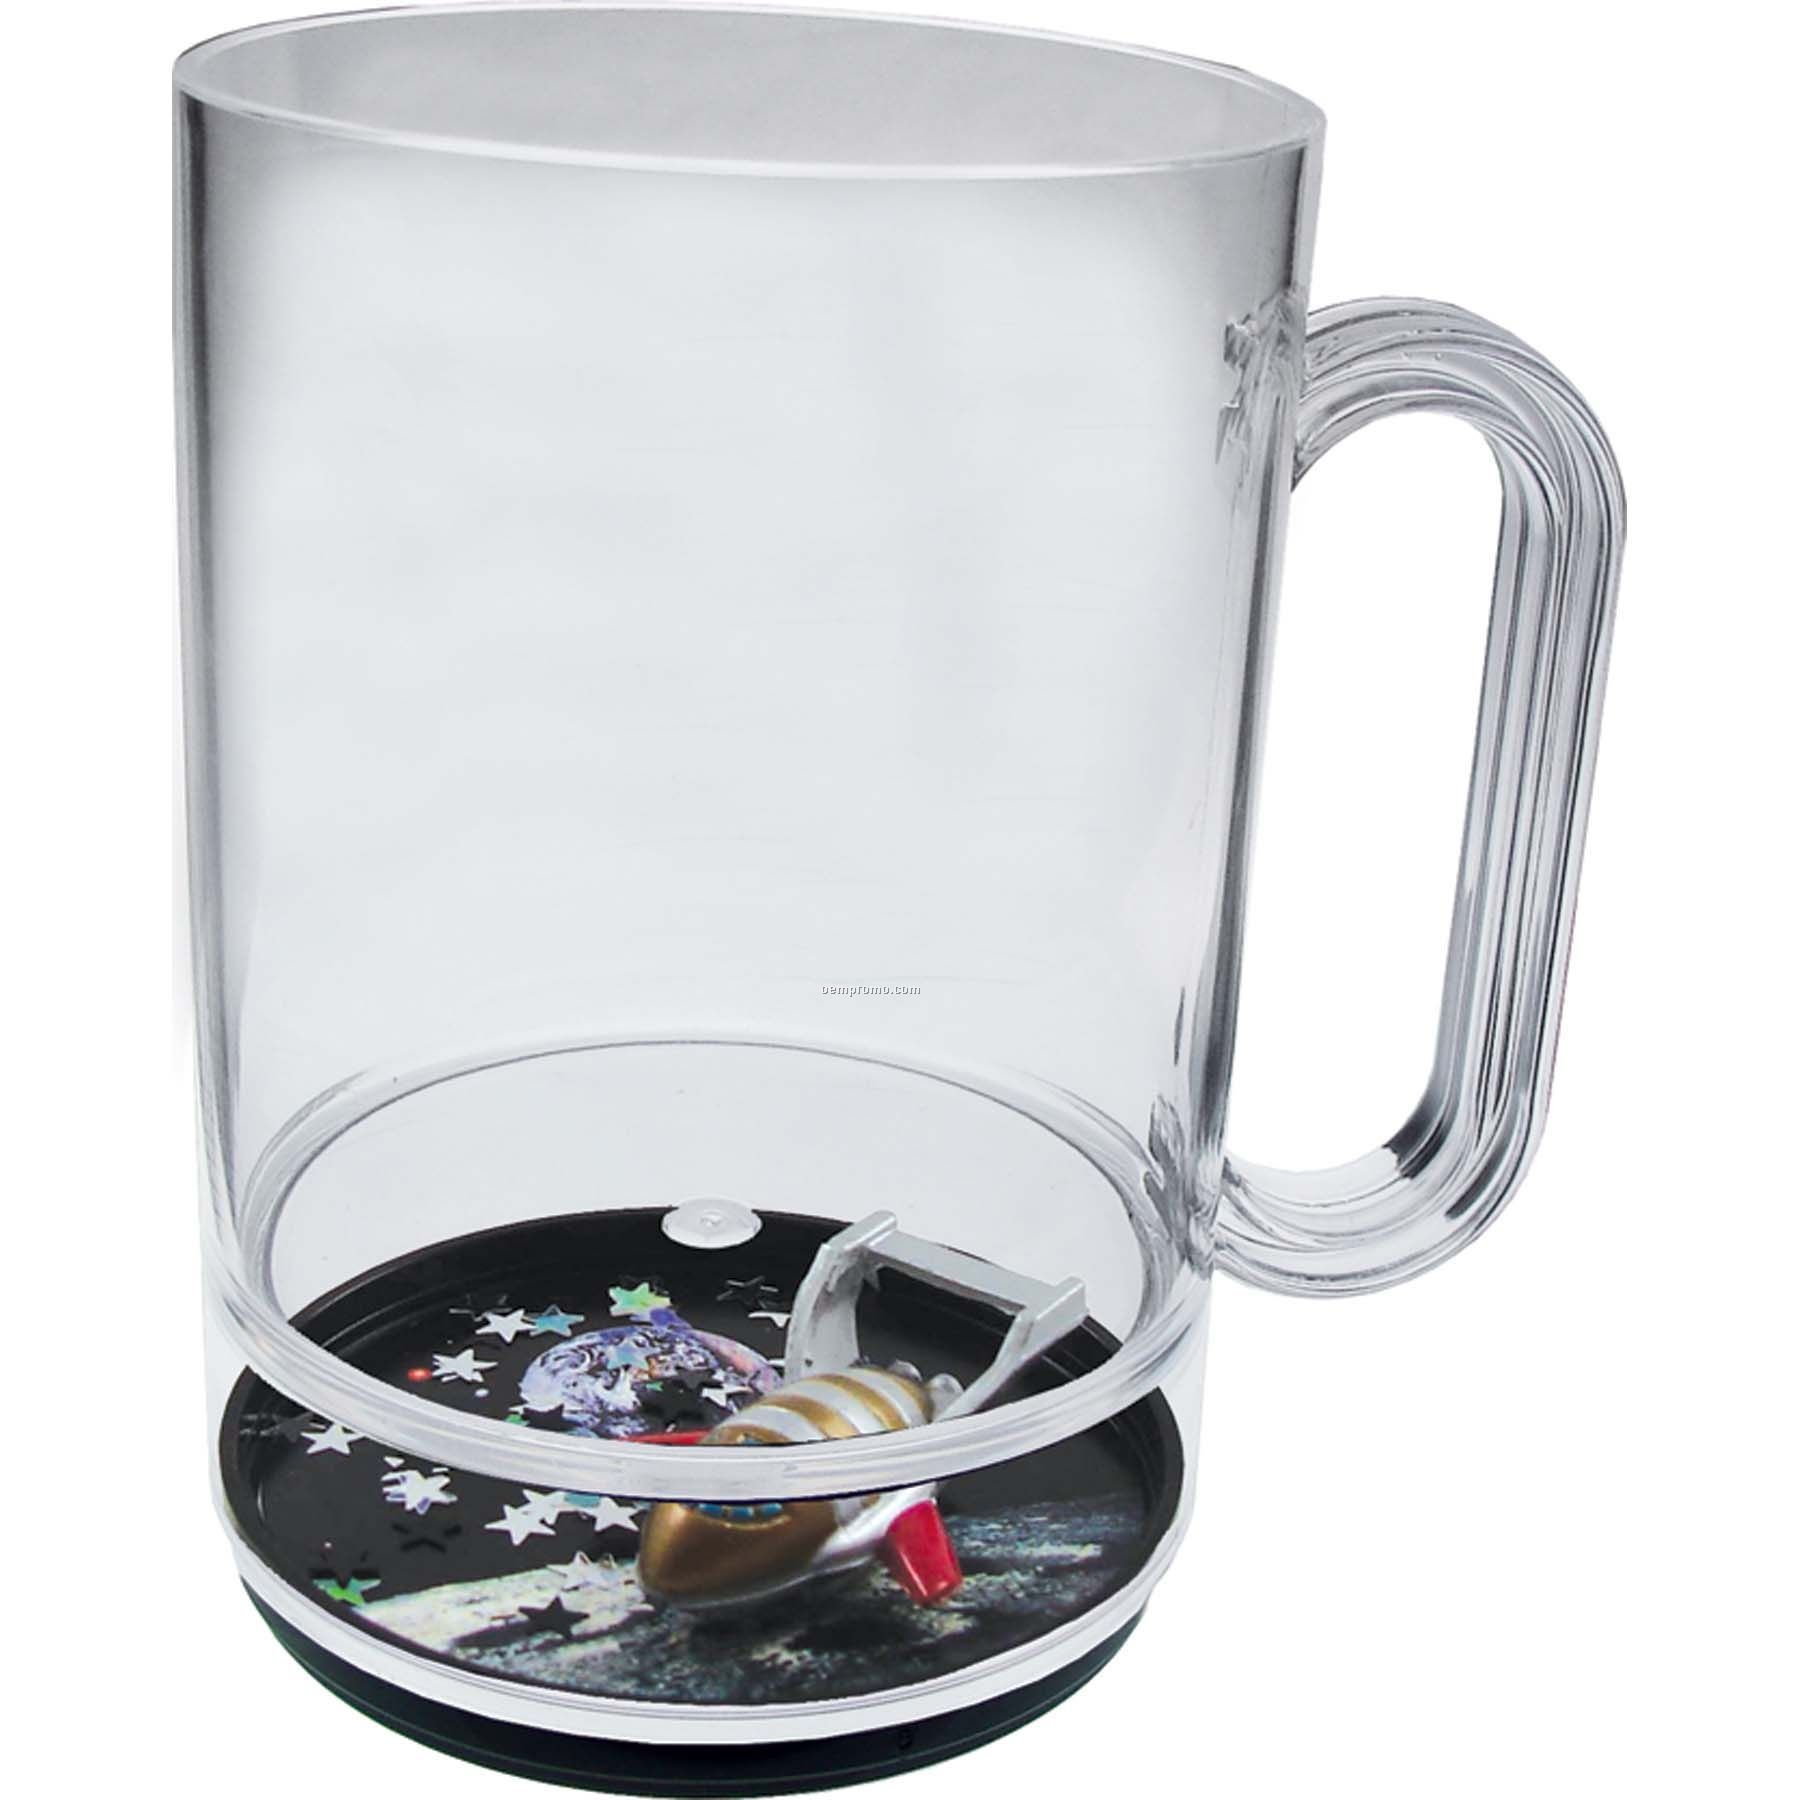 Space Voyager 16 Oz. Compartment Mug